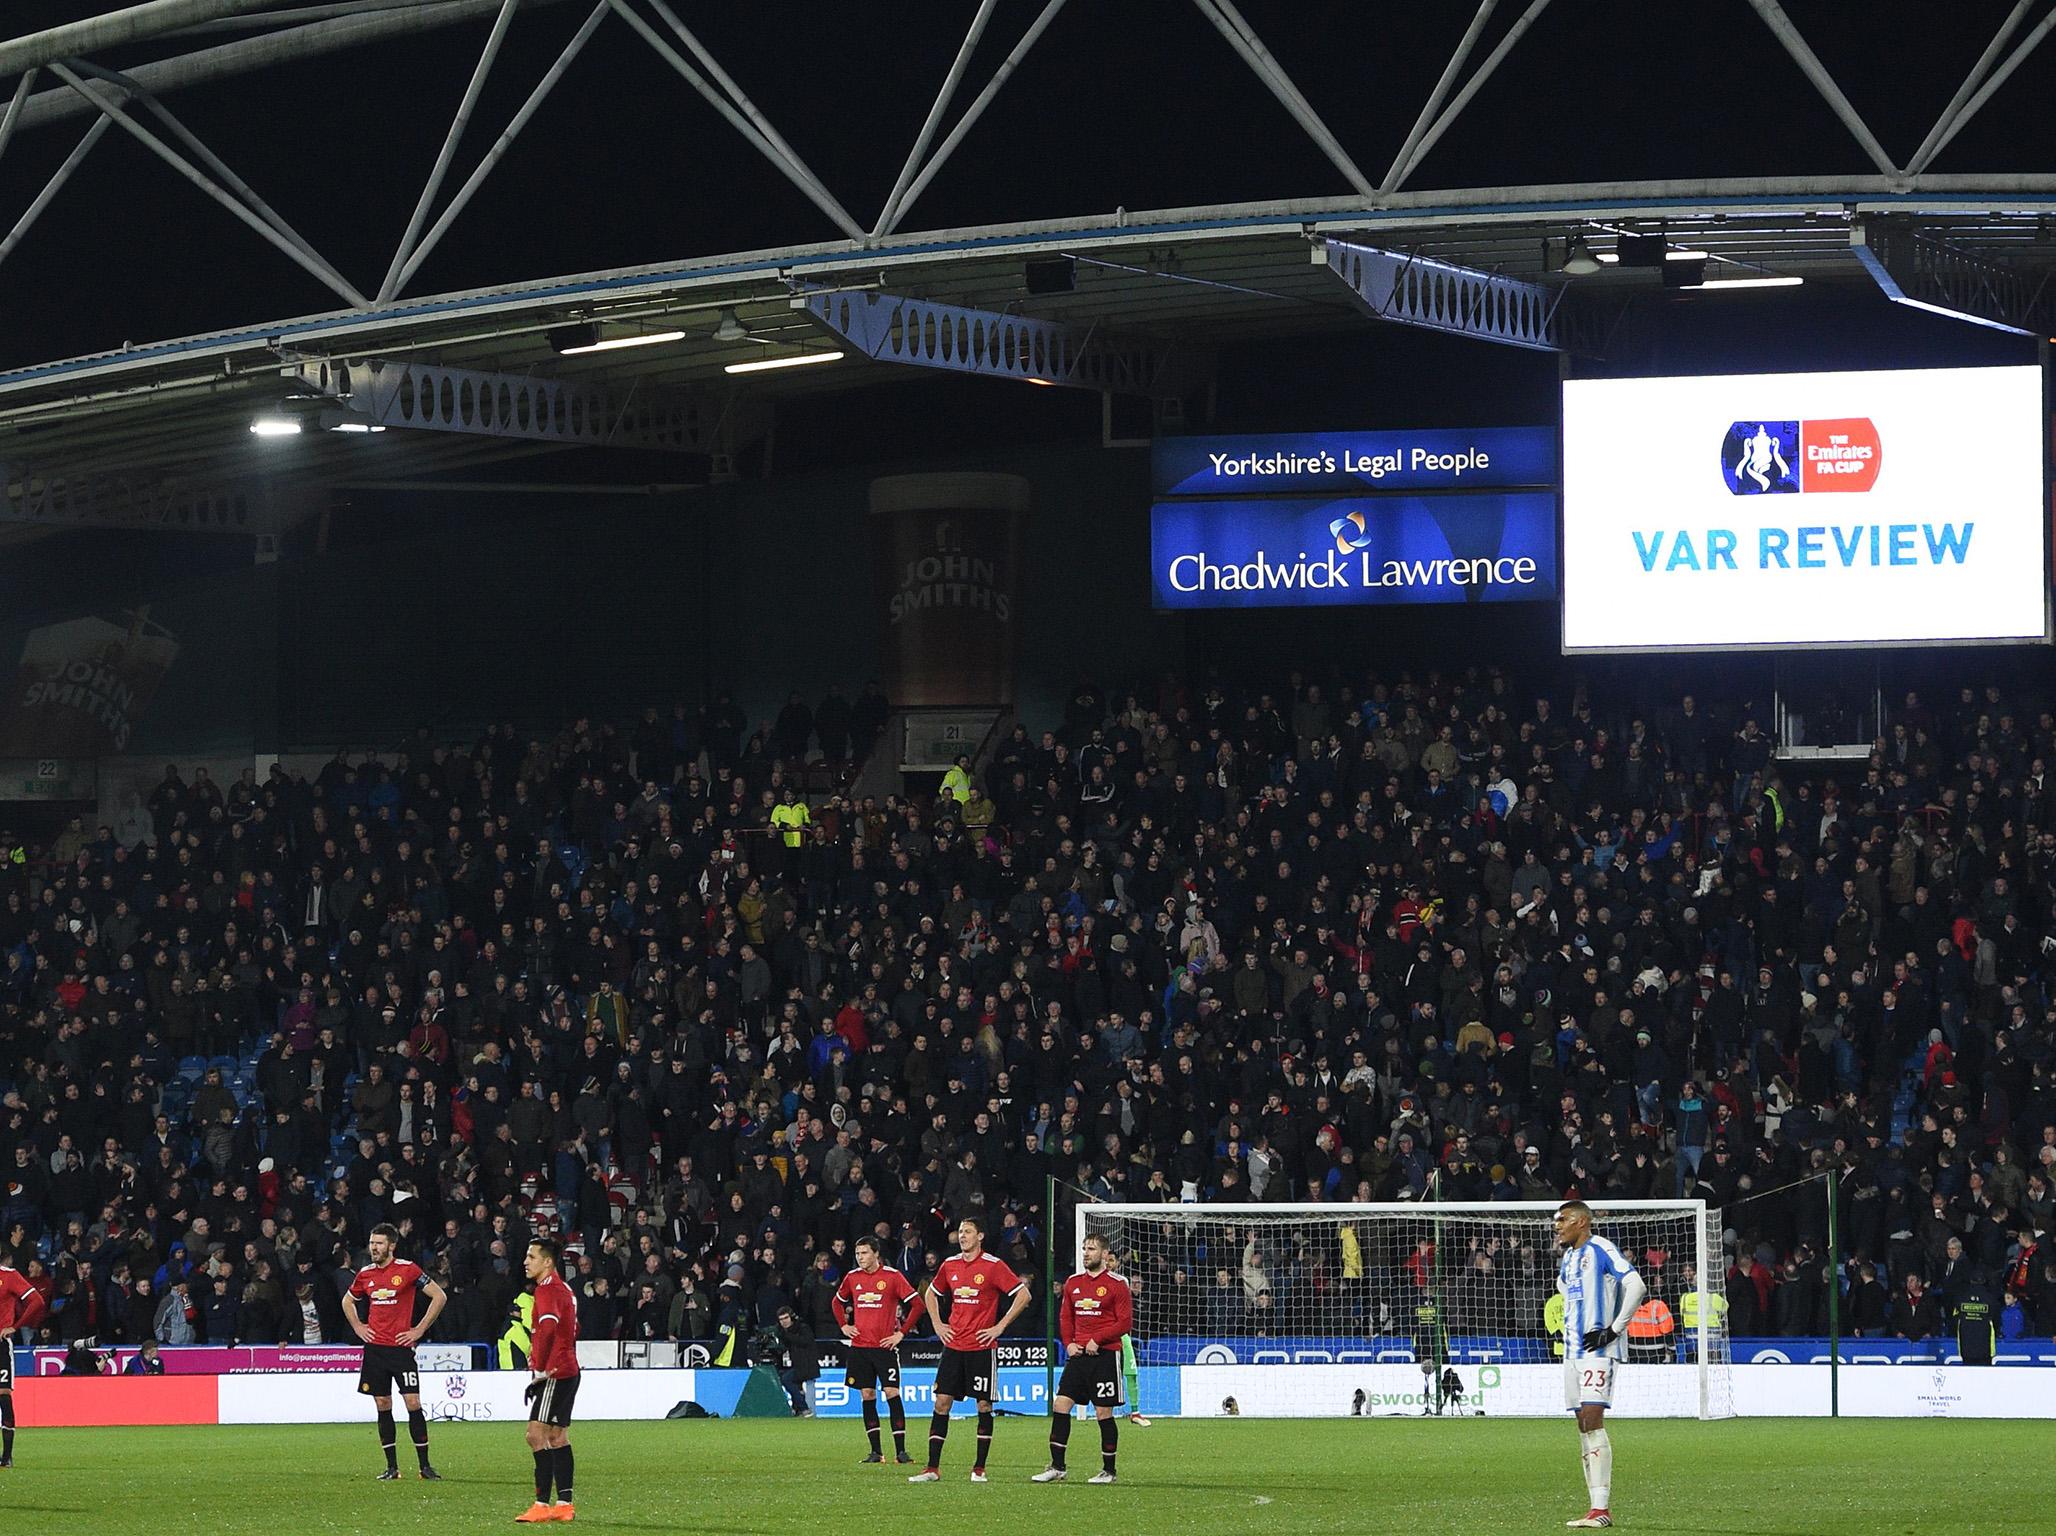 VAR has been used at Premier League grounds in the FA Cup